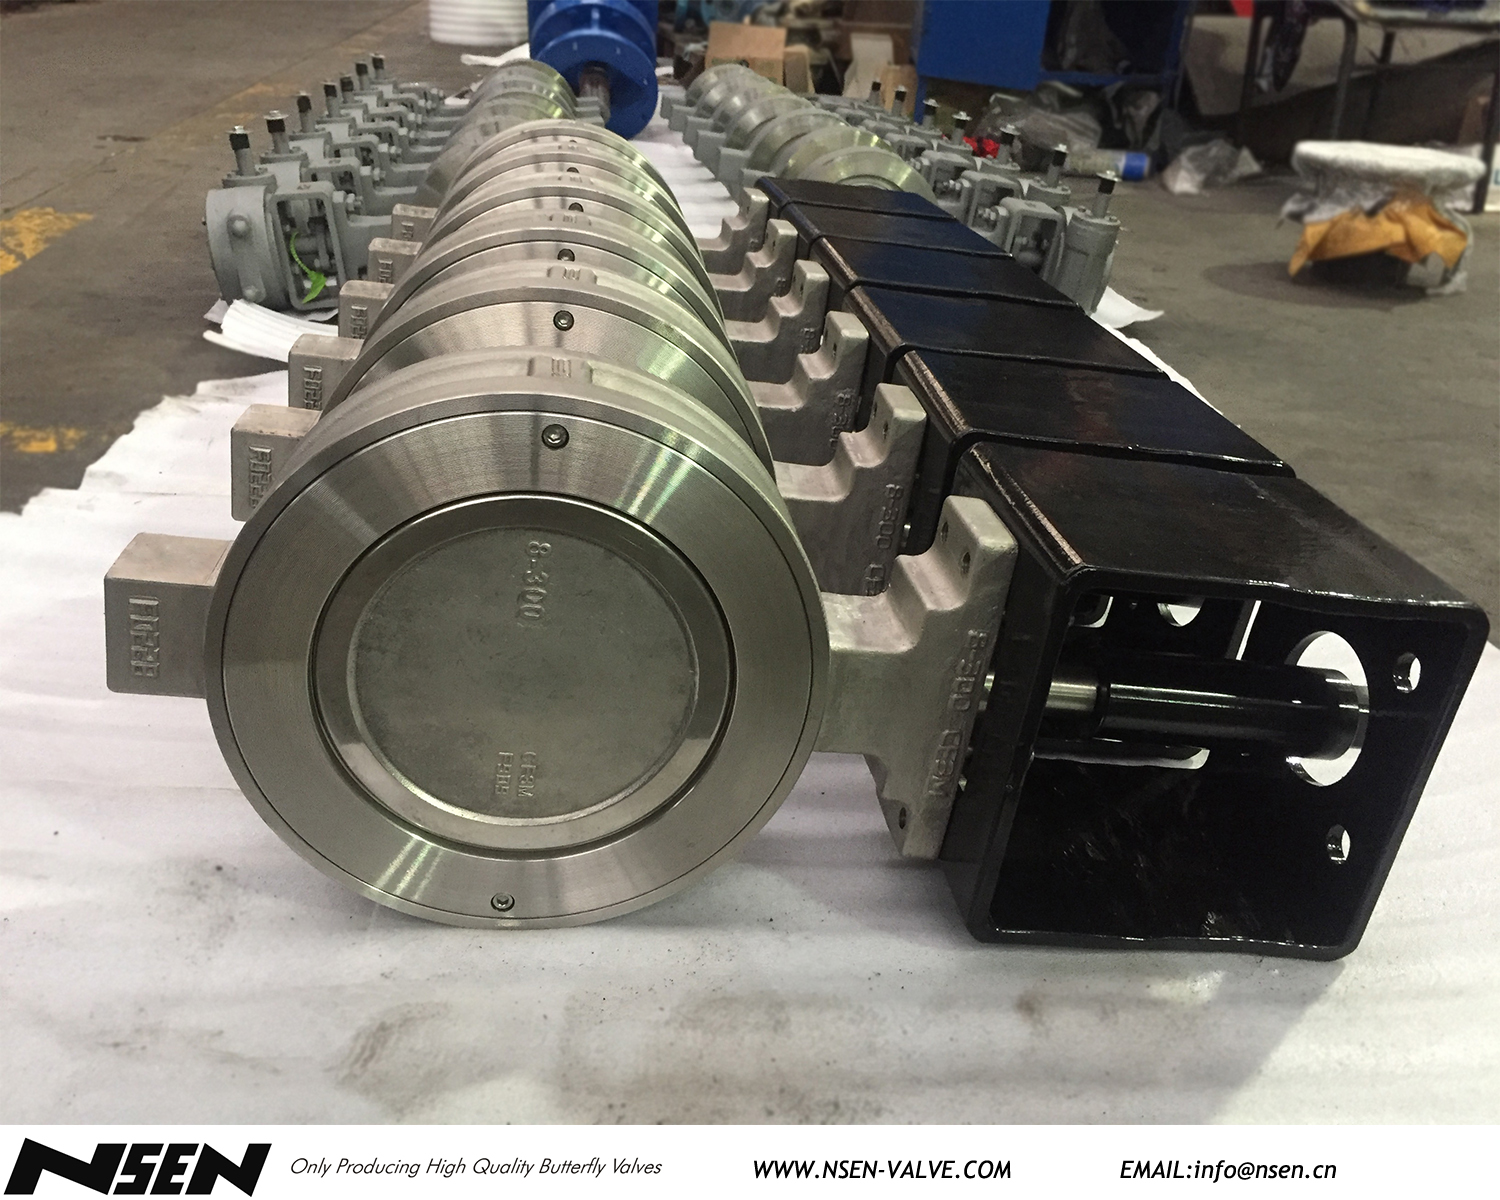 Taas nga performance double eccentric butterfly valve